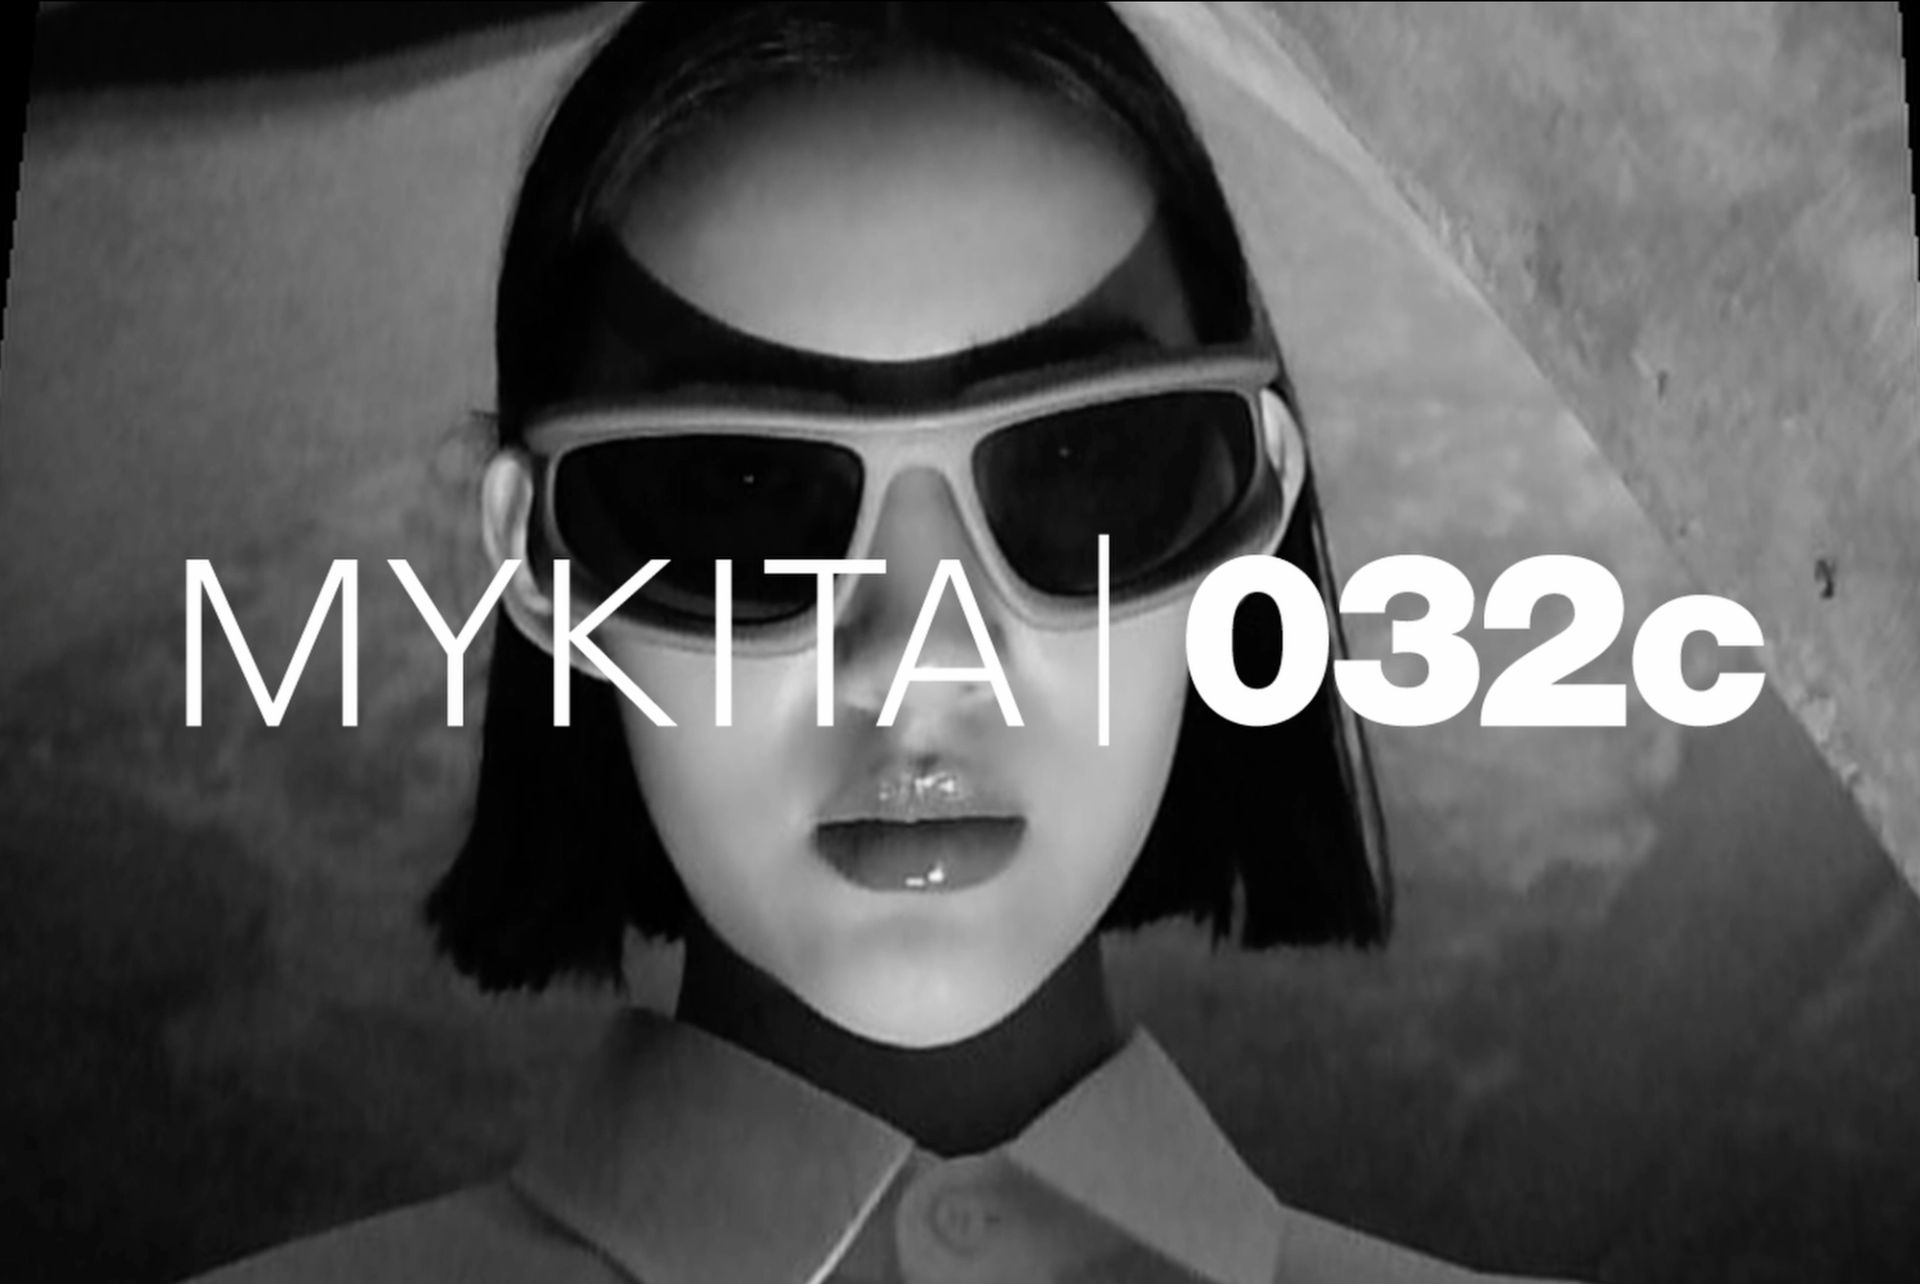 MYKITA I 032c’s First Sunglasses Dropping Today